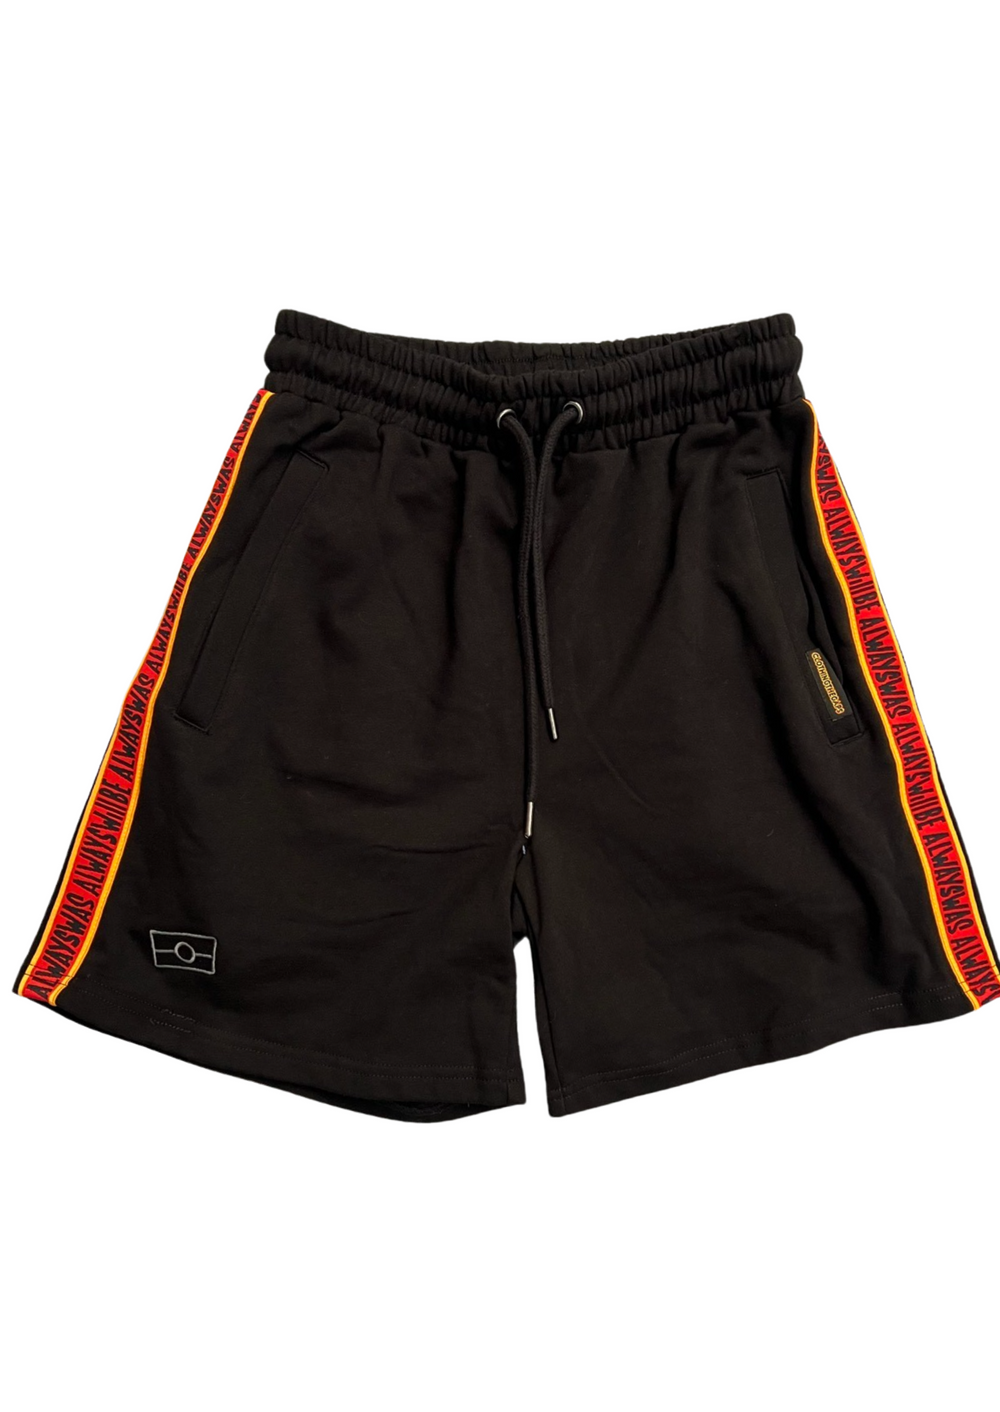 Clothing the Gaps. Black cotton shorts. With black drawstrings. Embroiled black outlined aboriginal flag in corner. Black 'always was always will be' text on a red background with a yellow trim. In a cotton tape strip going down both sides of shorts. 